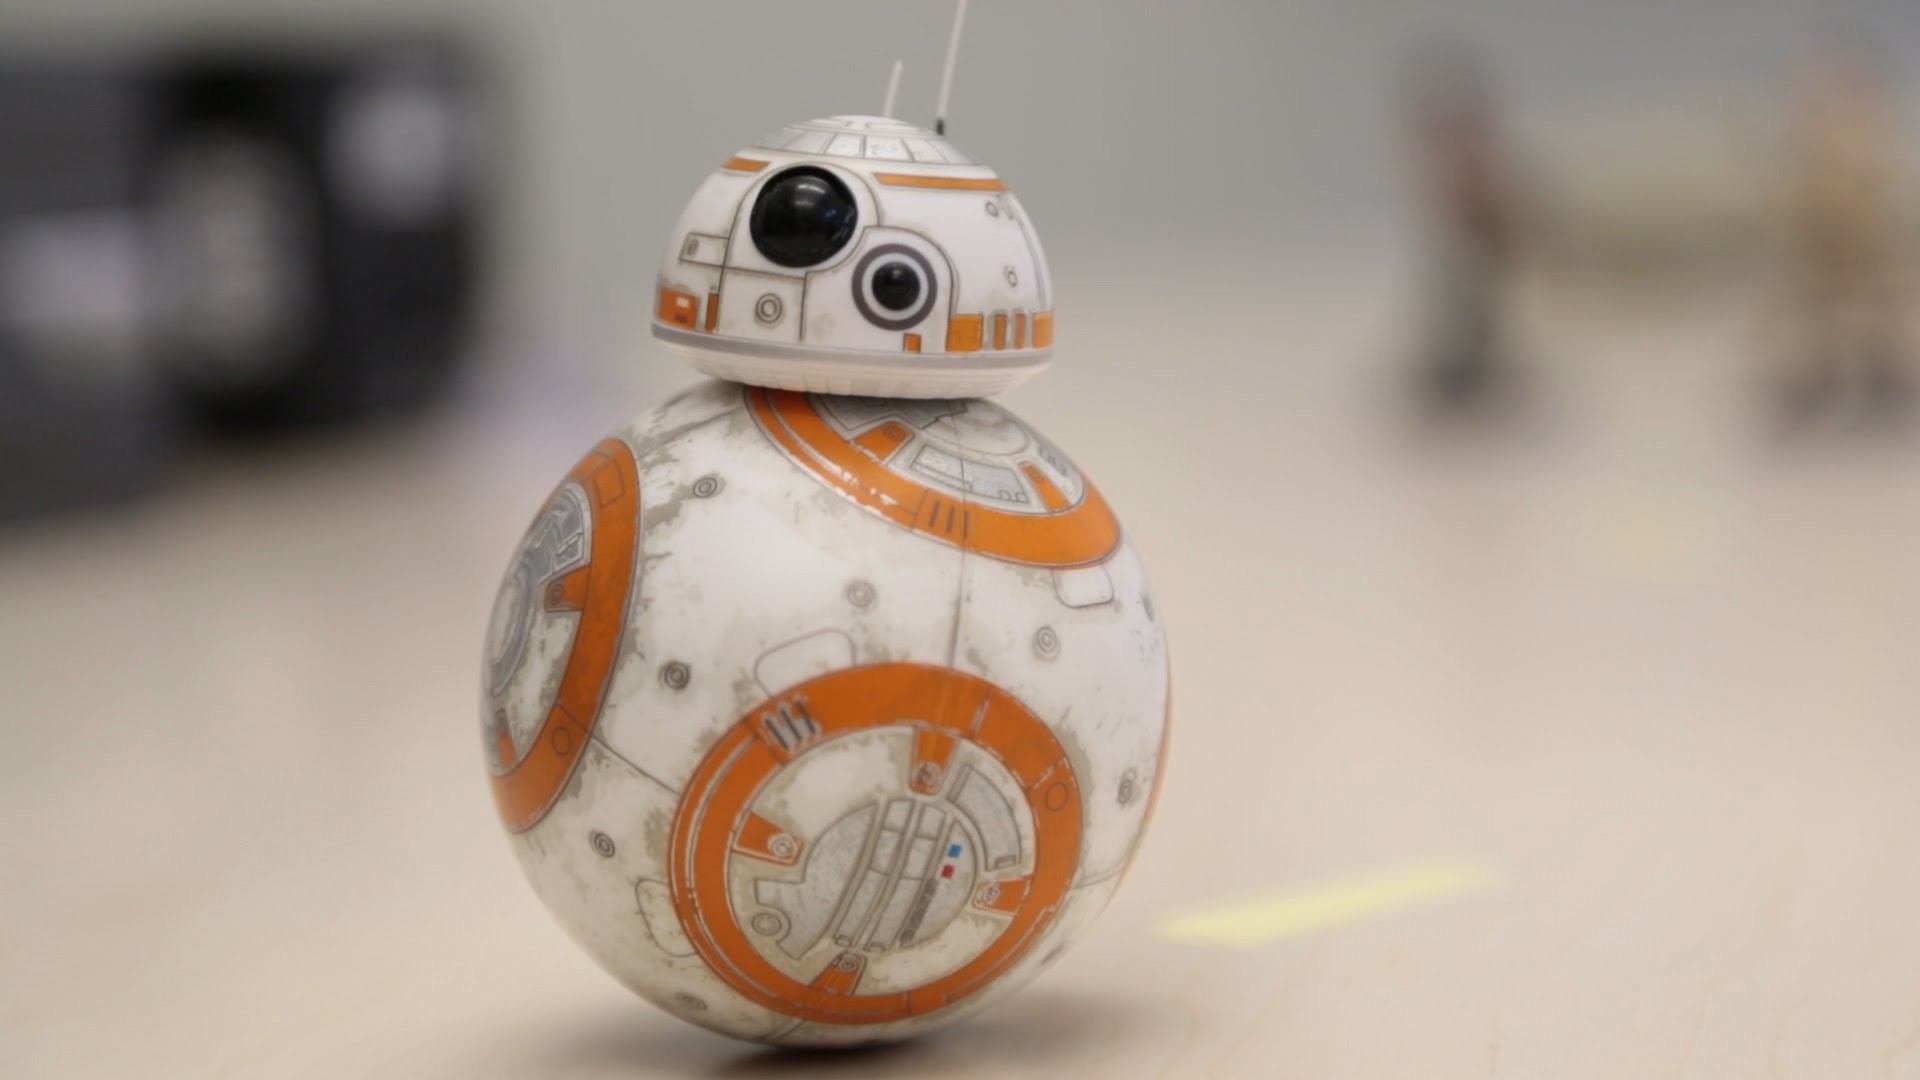 1920x1080 BB-8 Droid and Sphero Force Band - hands on review and unboxing - YouTube